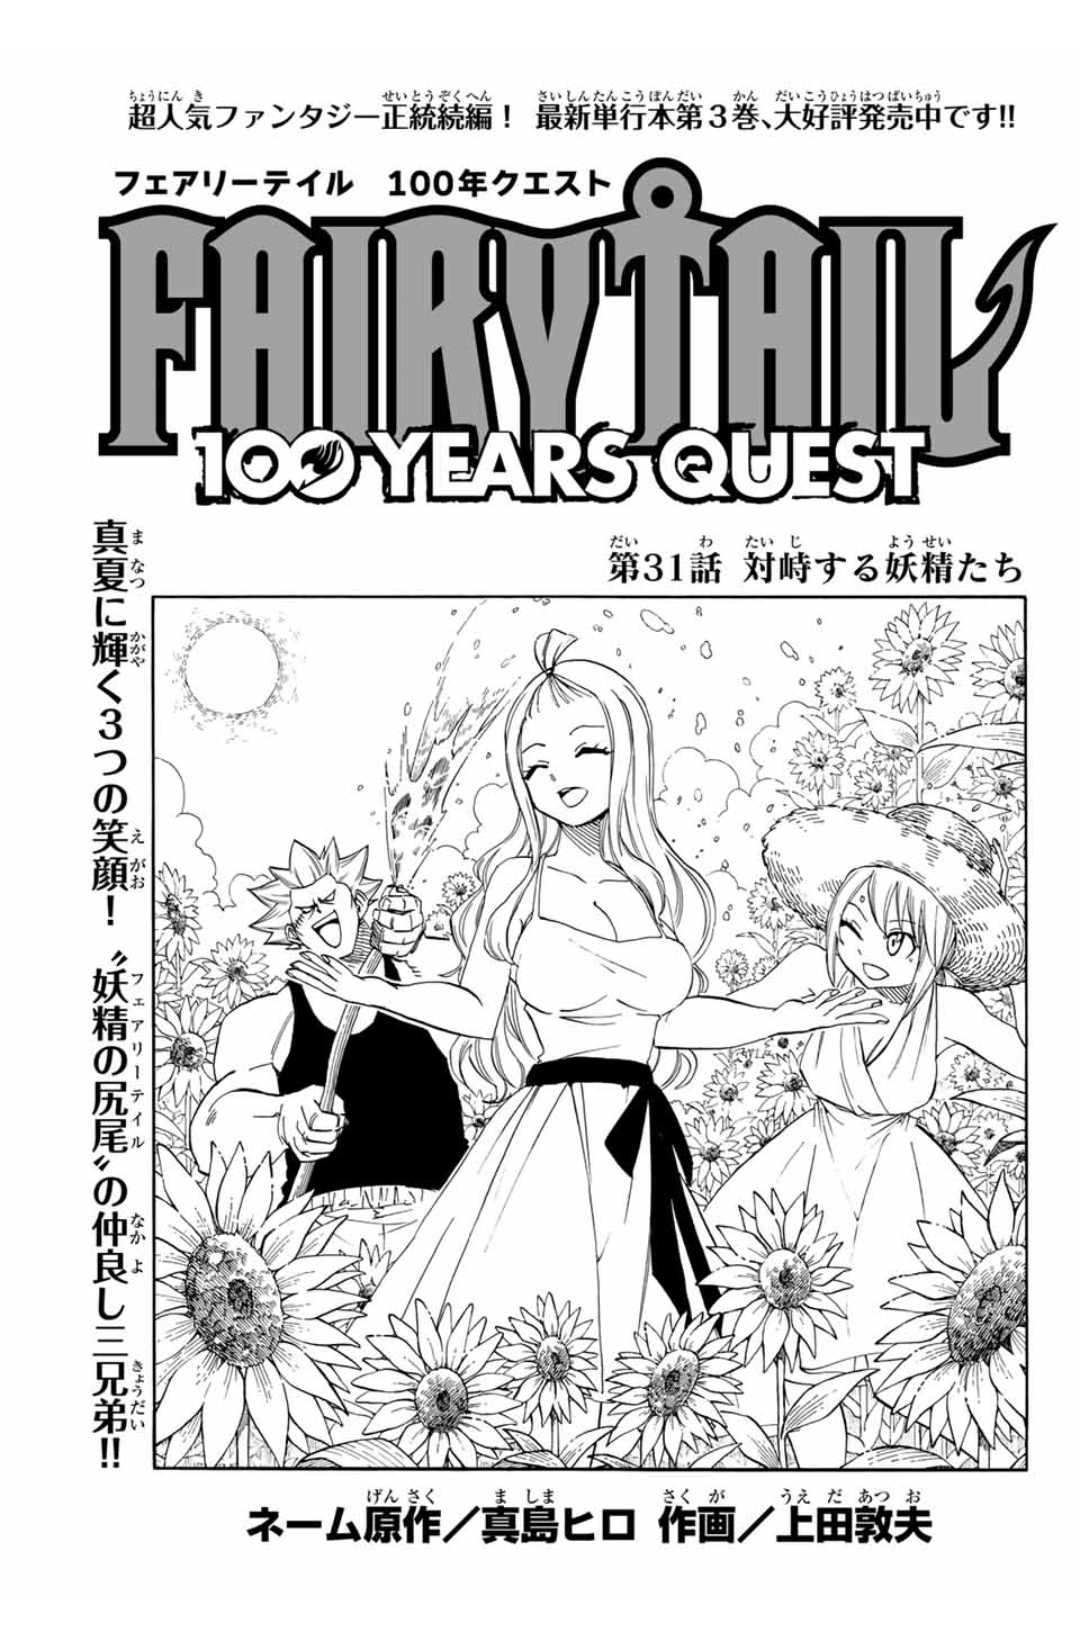 Fairy Tail: 100 Years Quest Chapter 31 | Fairy Tail Wiki | Fandom